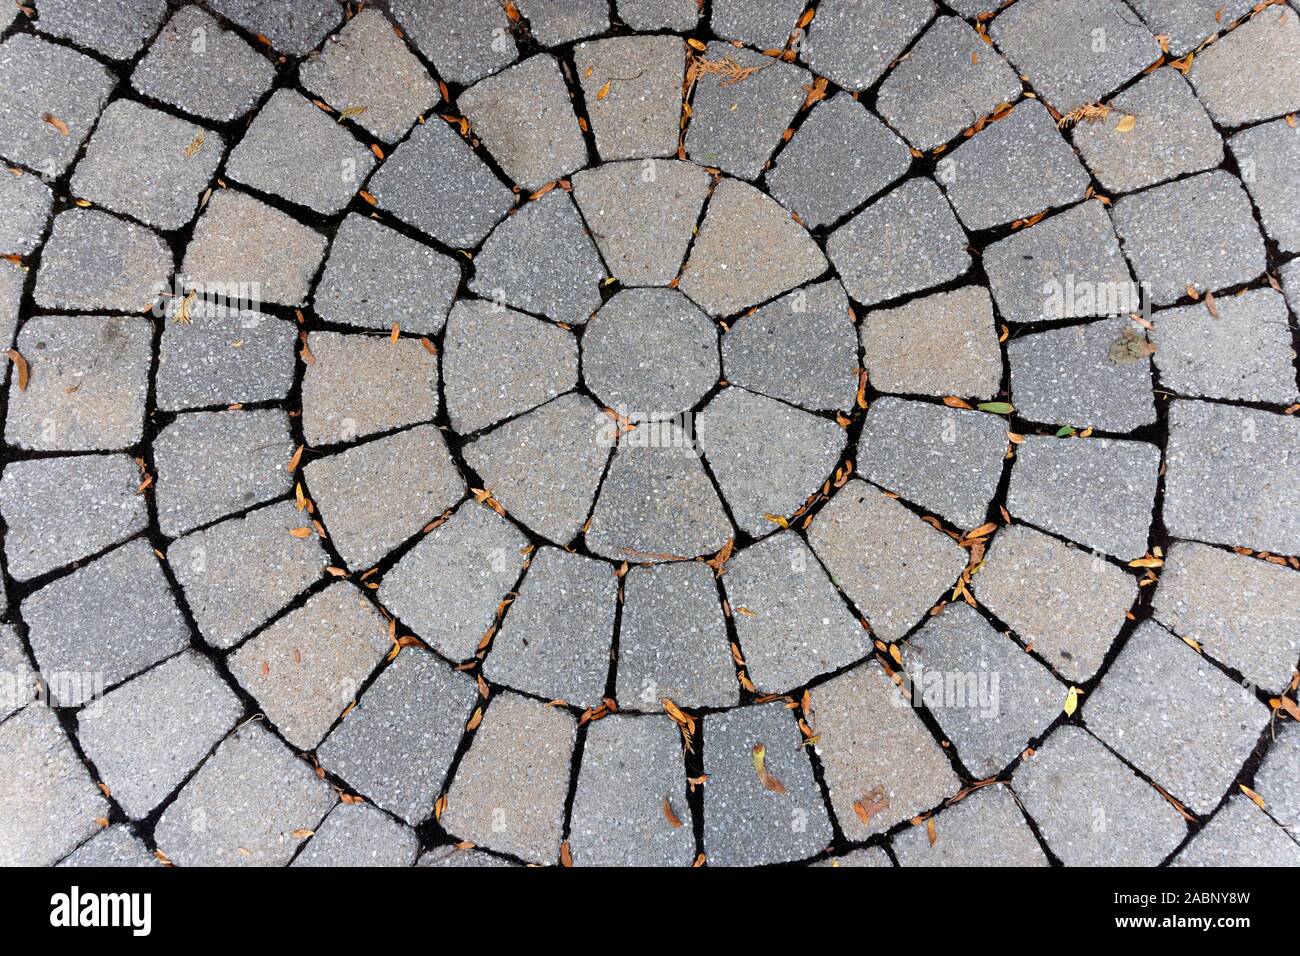 Closeup of cut paving stones arranged in a circular pattern on a footpath Stock Photo